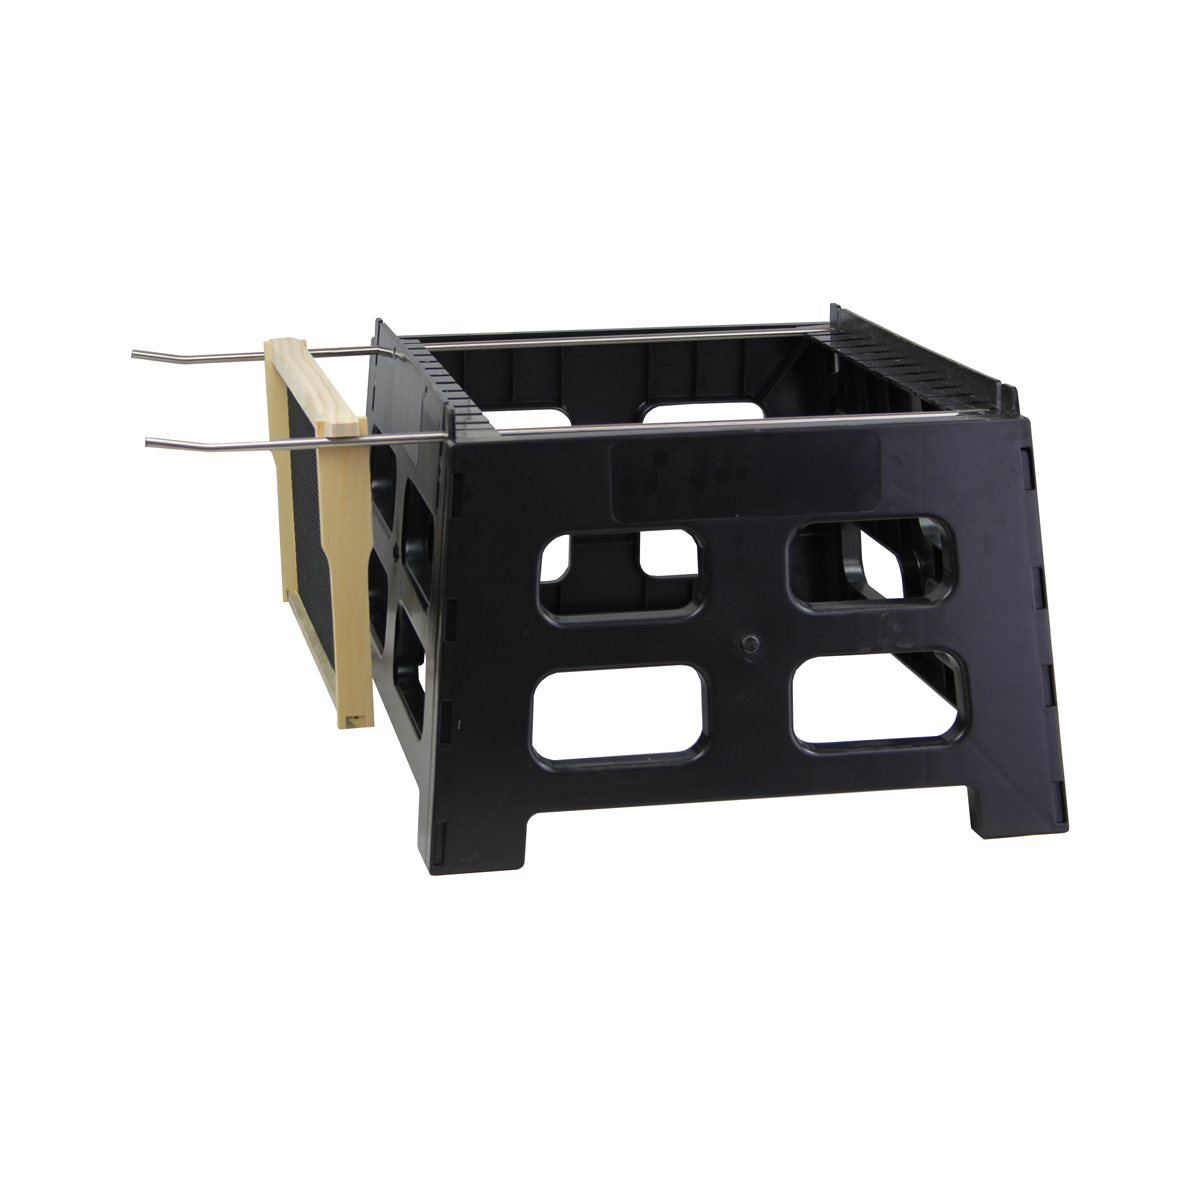 Black Plastic Hive Stand 12" Tall With 2 Metal Rods Coming Out The Side To Hold Beehive Frames